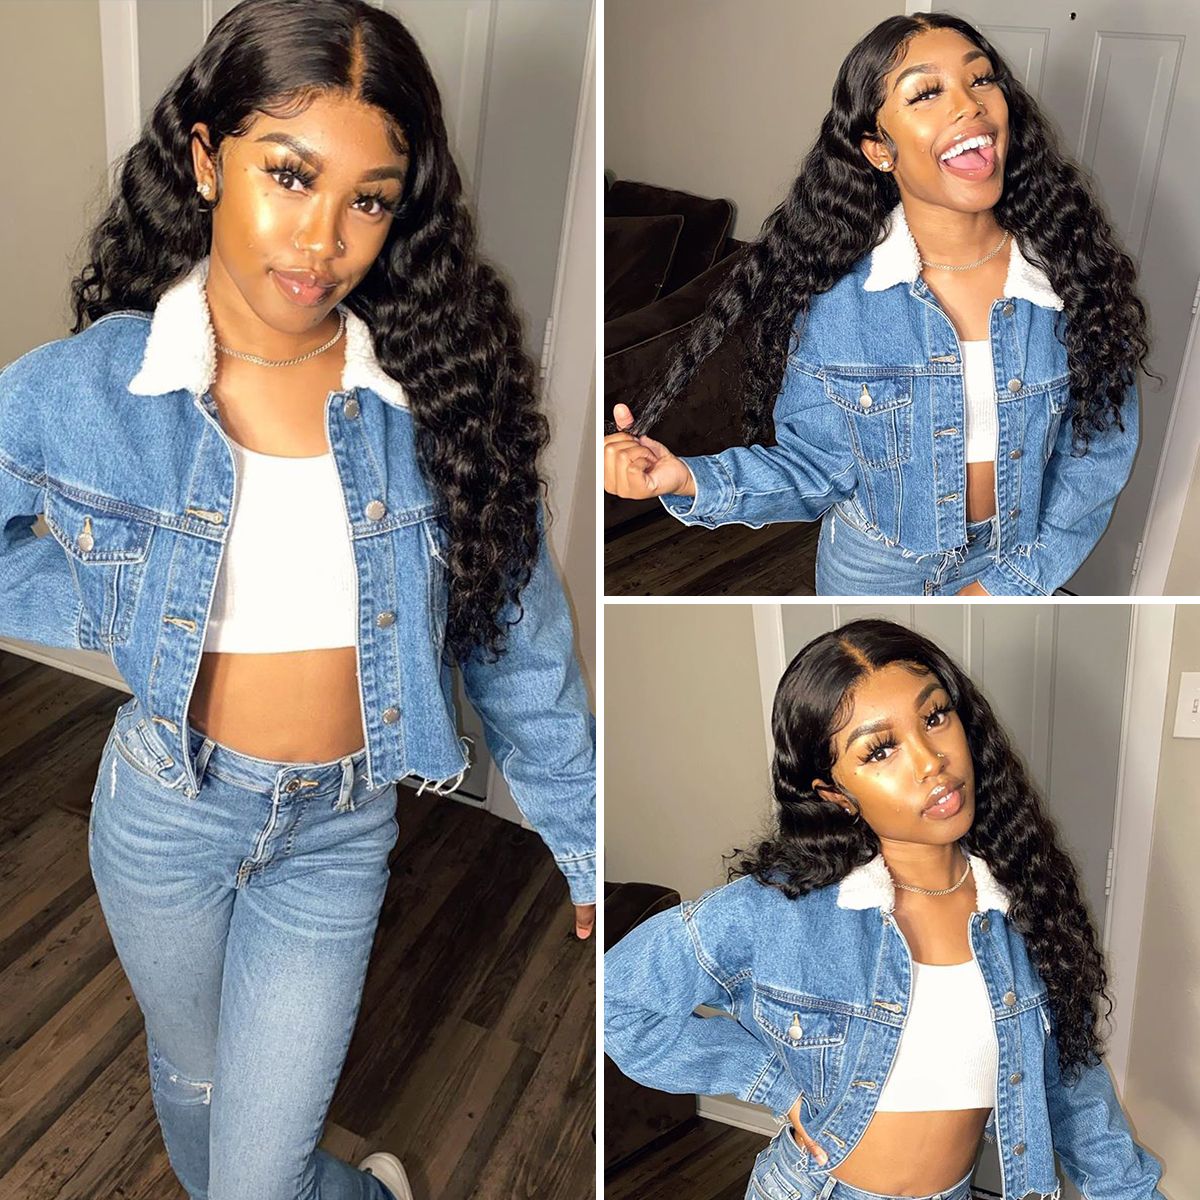 Loose Deep 360 Lace Frontal Wig